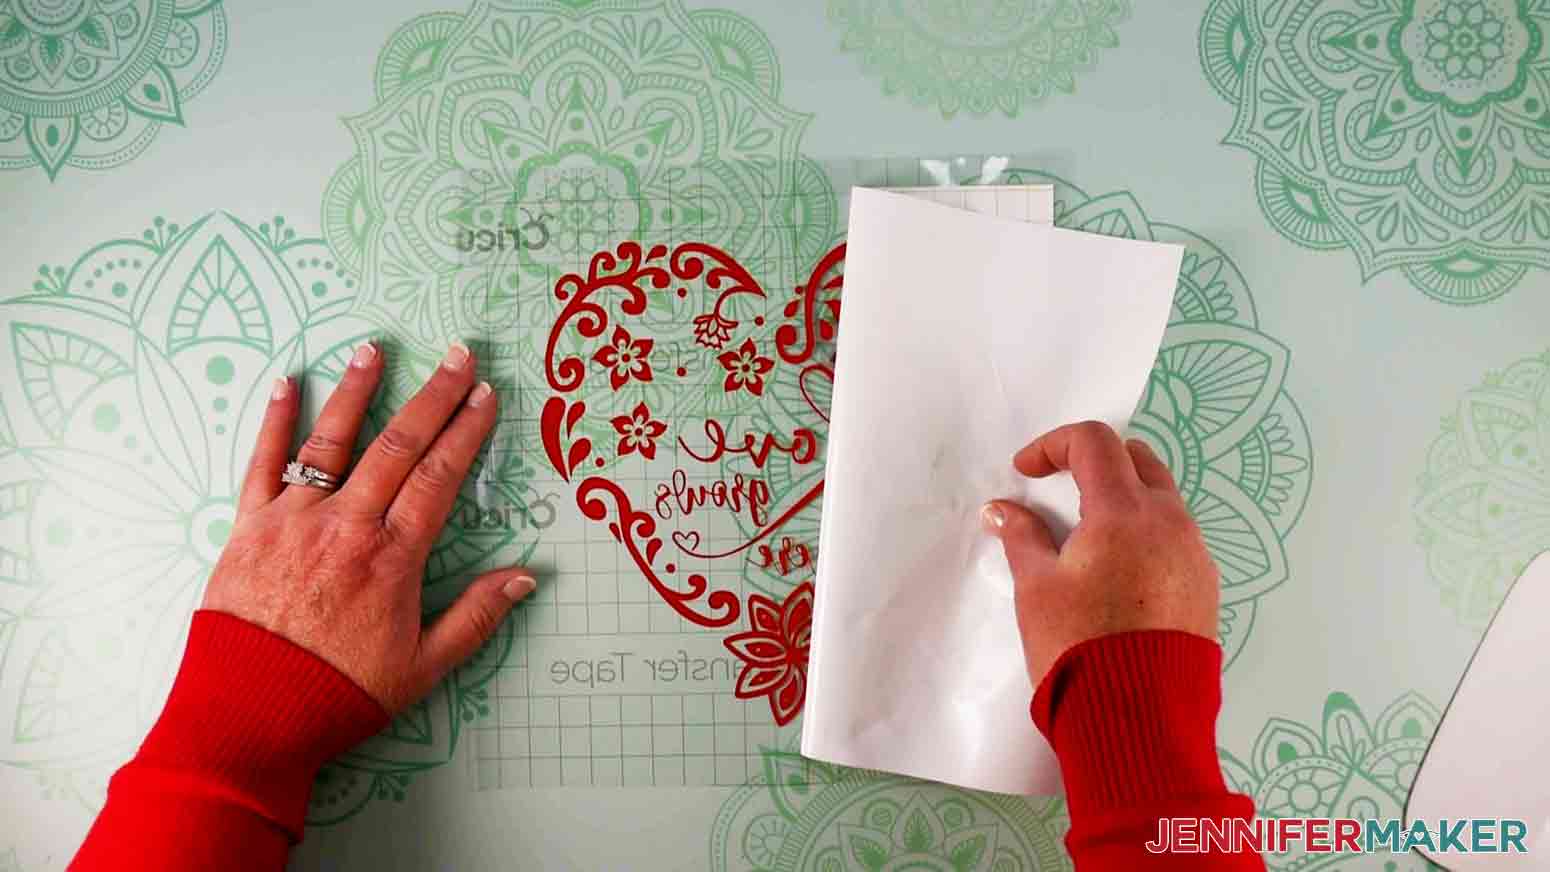 Removing transfer tape backing from intricate hearts decal